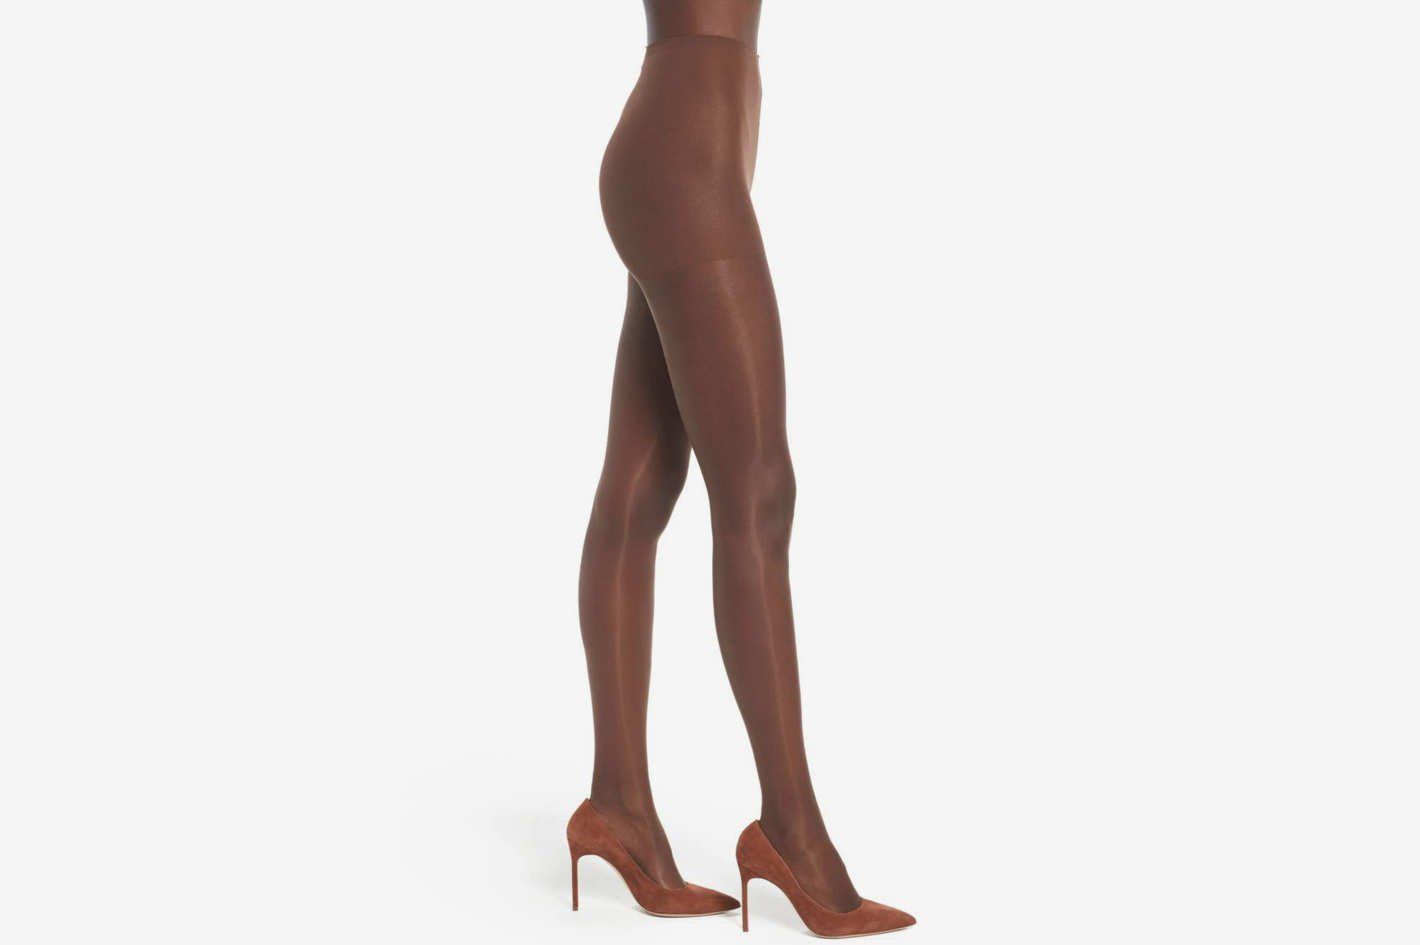 Doppler reccomend Women complerely covered with pantyhose